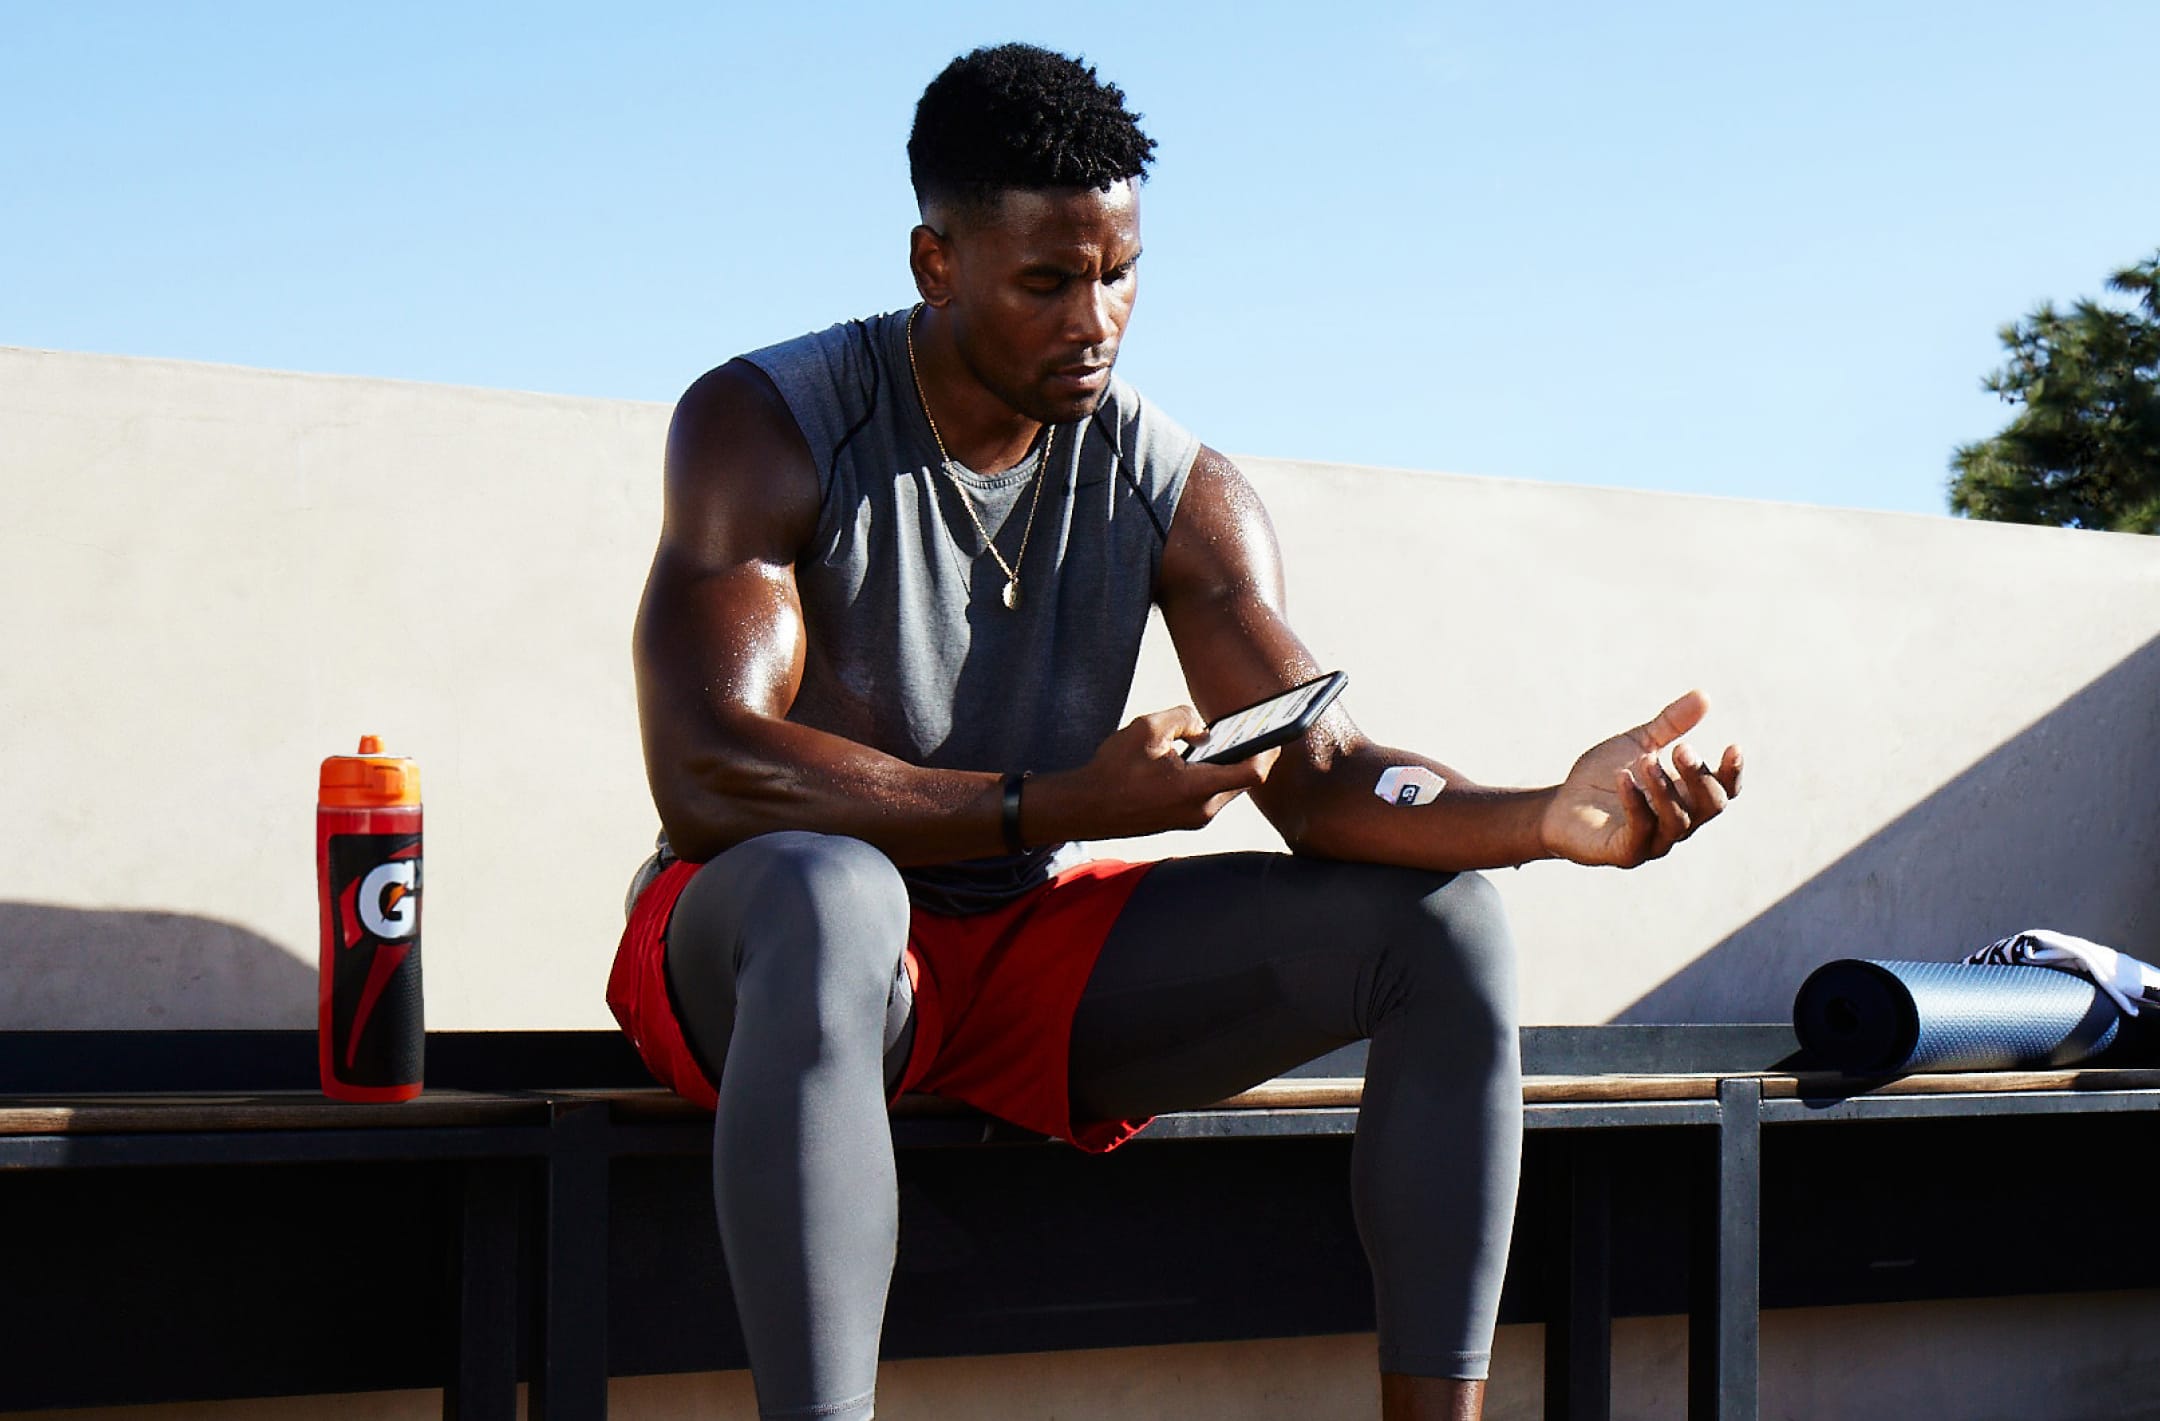 Gatorade launches Gx Sweat Patch that measures sweat and hydration levels